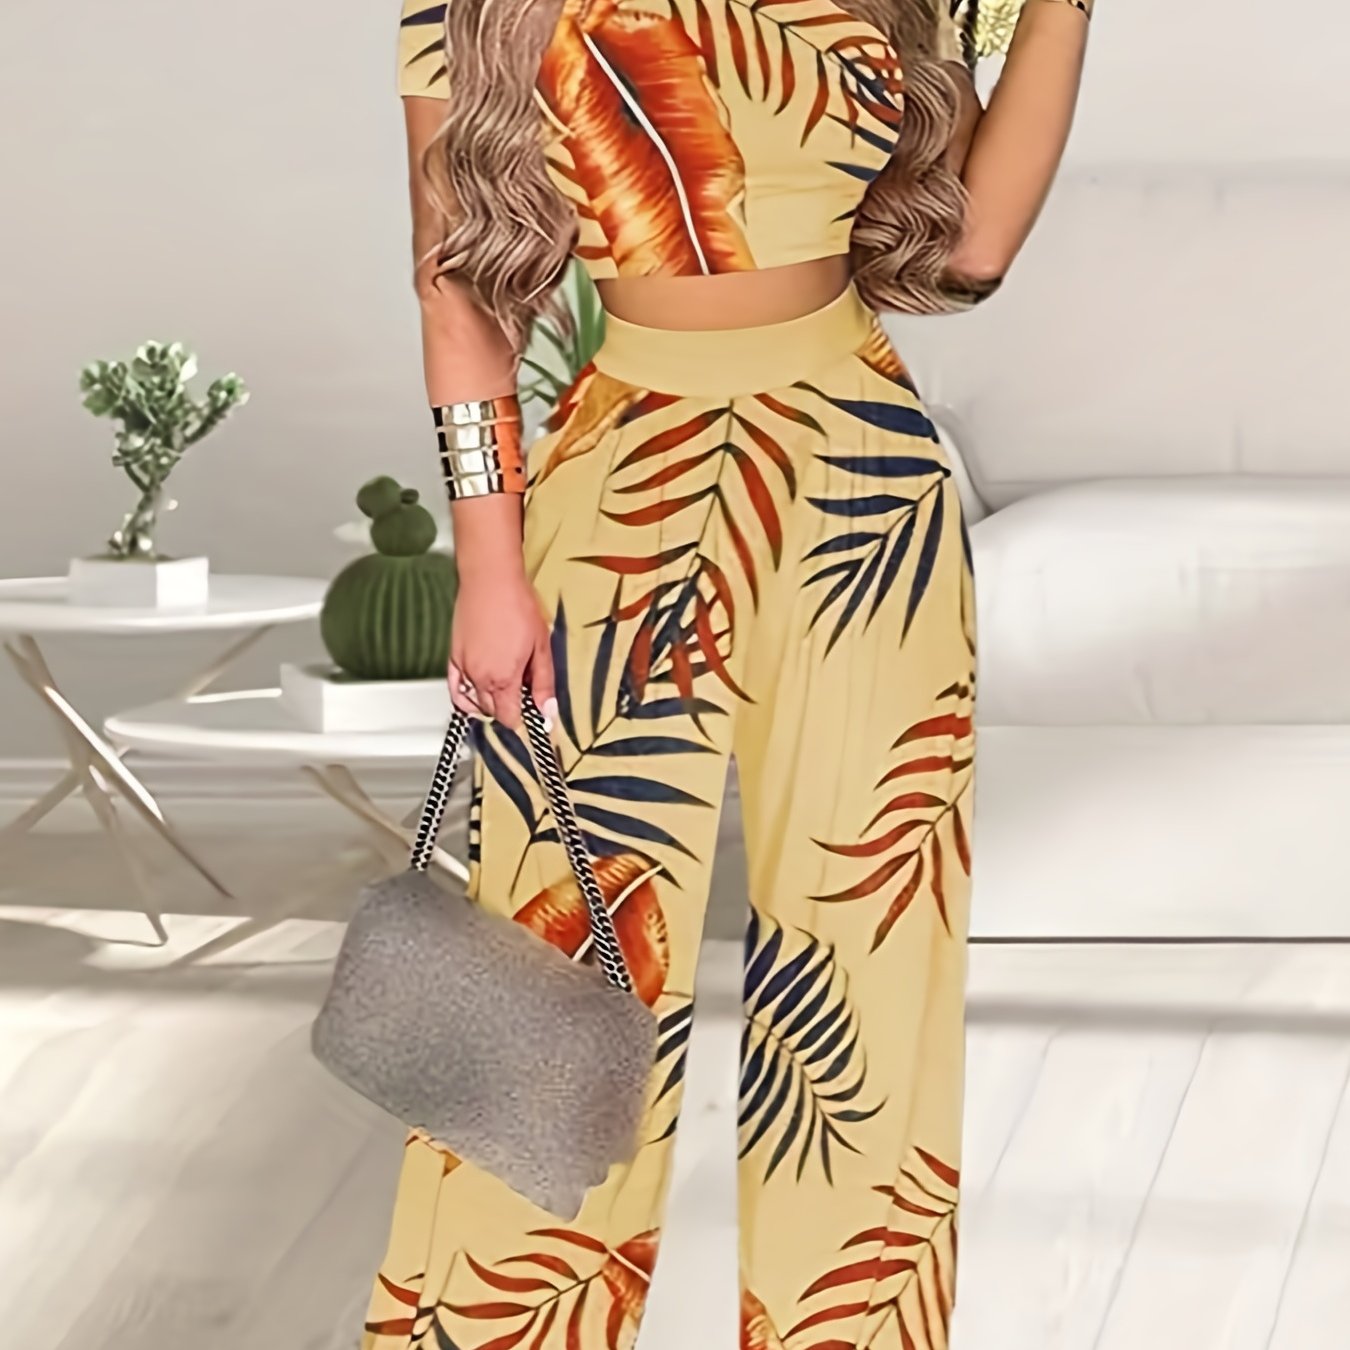 Boho Summer Two Pieces Set, Cropped Solid Short Sleeve T-shirt & High Waist Floral Print Wide Leg Pants Outfits, Women's Clothing Big Leaves